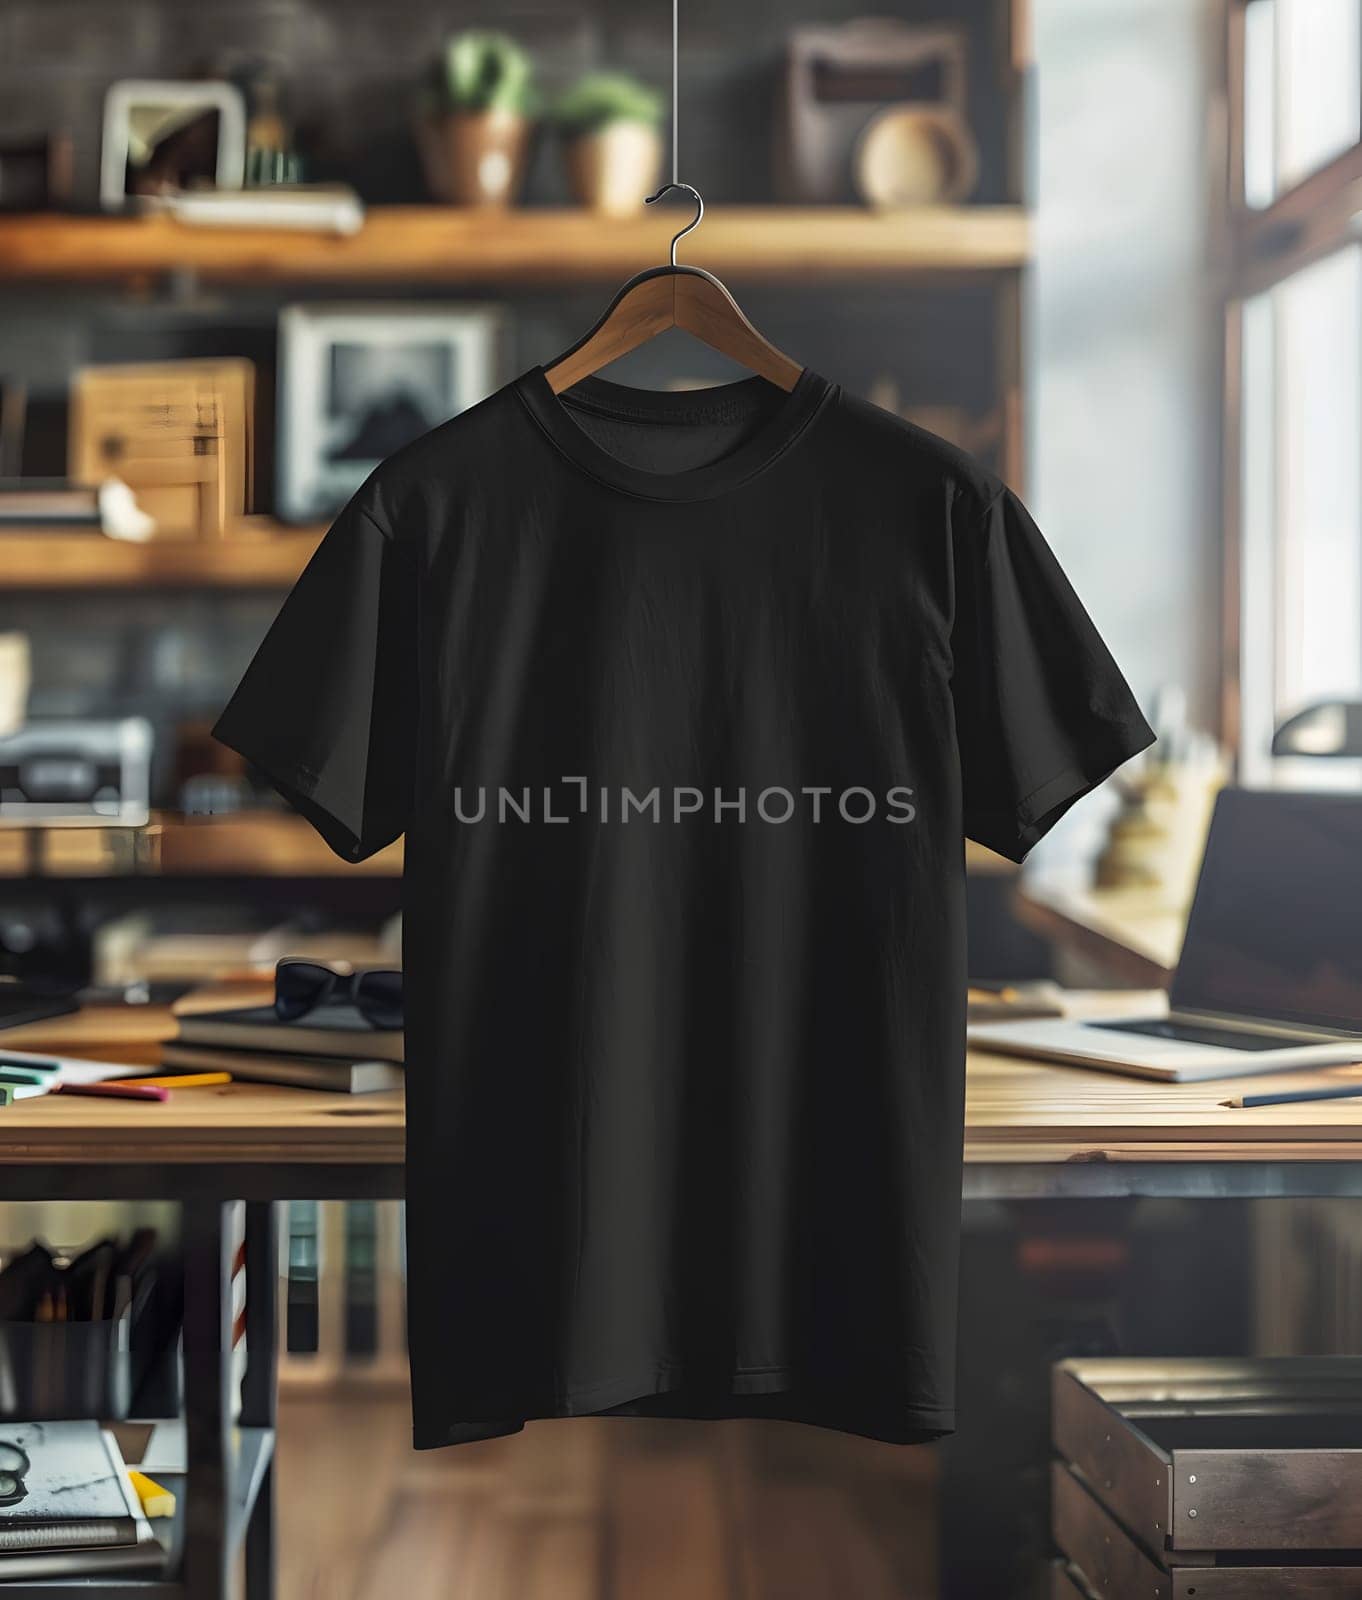 Black tshirt on wooden hanger fashion accessory for formal wear by Nadtochiy